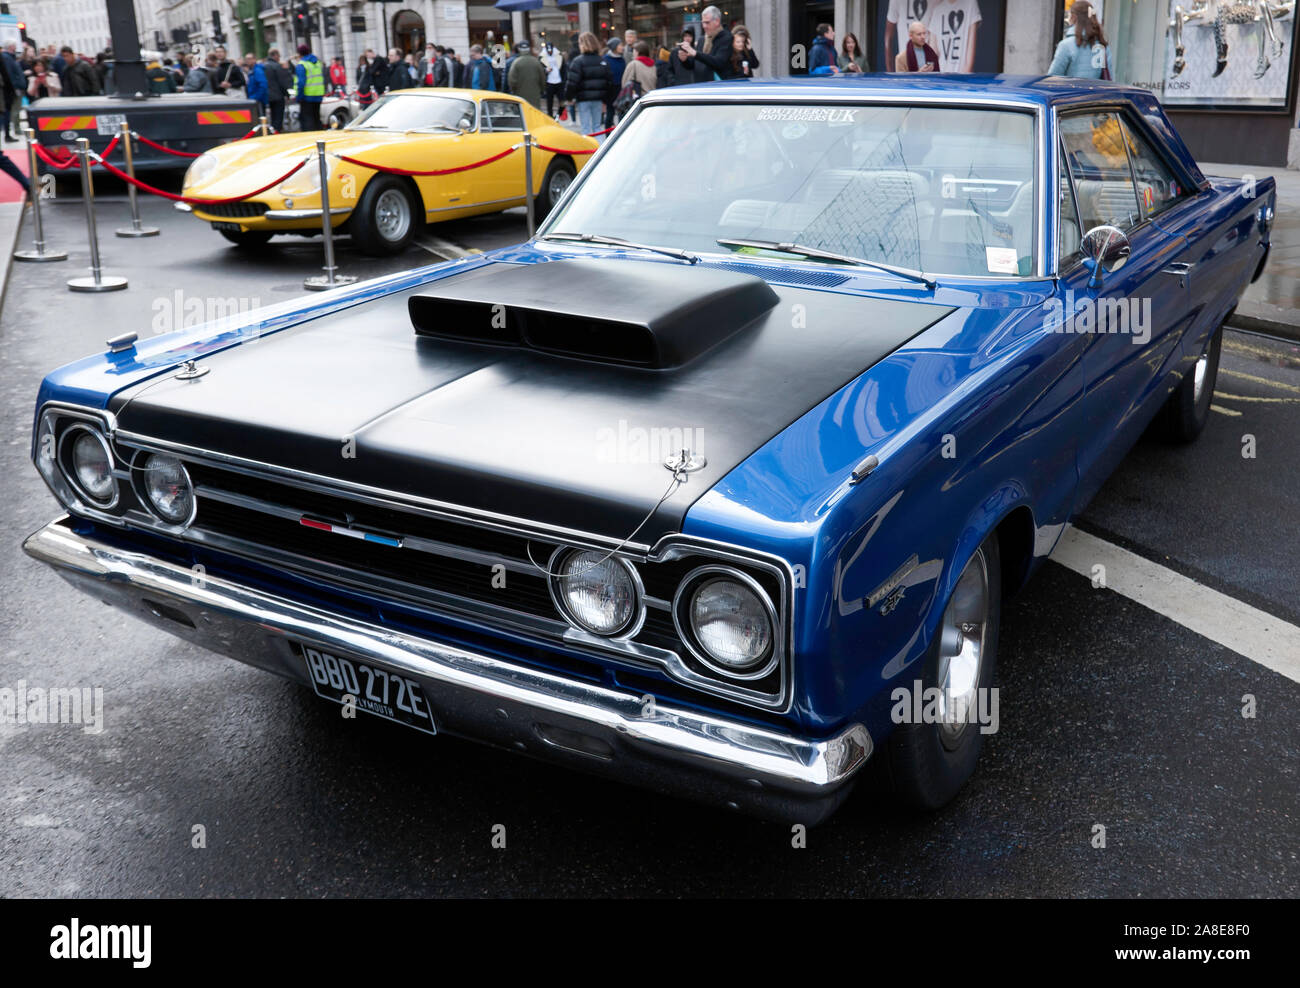 Three-quarter front view of a Blue, 1967, Plymouth GTX, on display at the Regents Street Motor Show 2019 Stock Photo